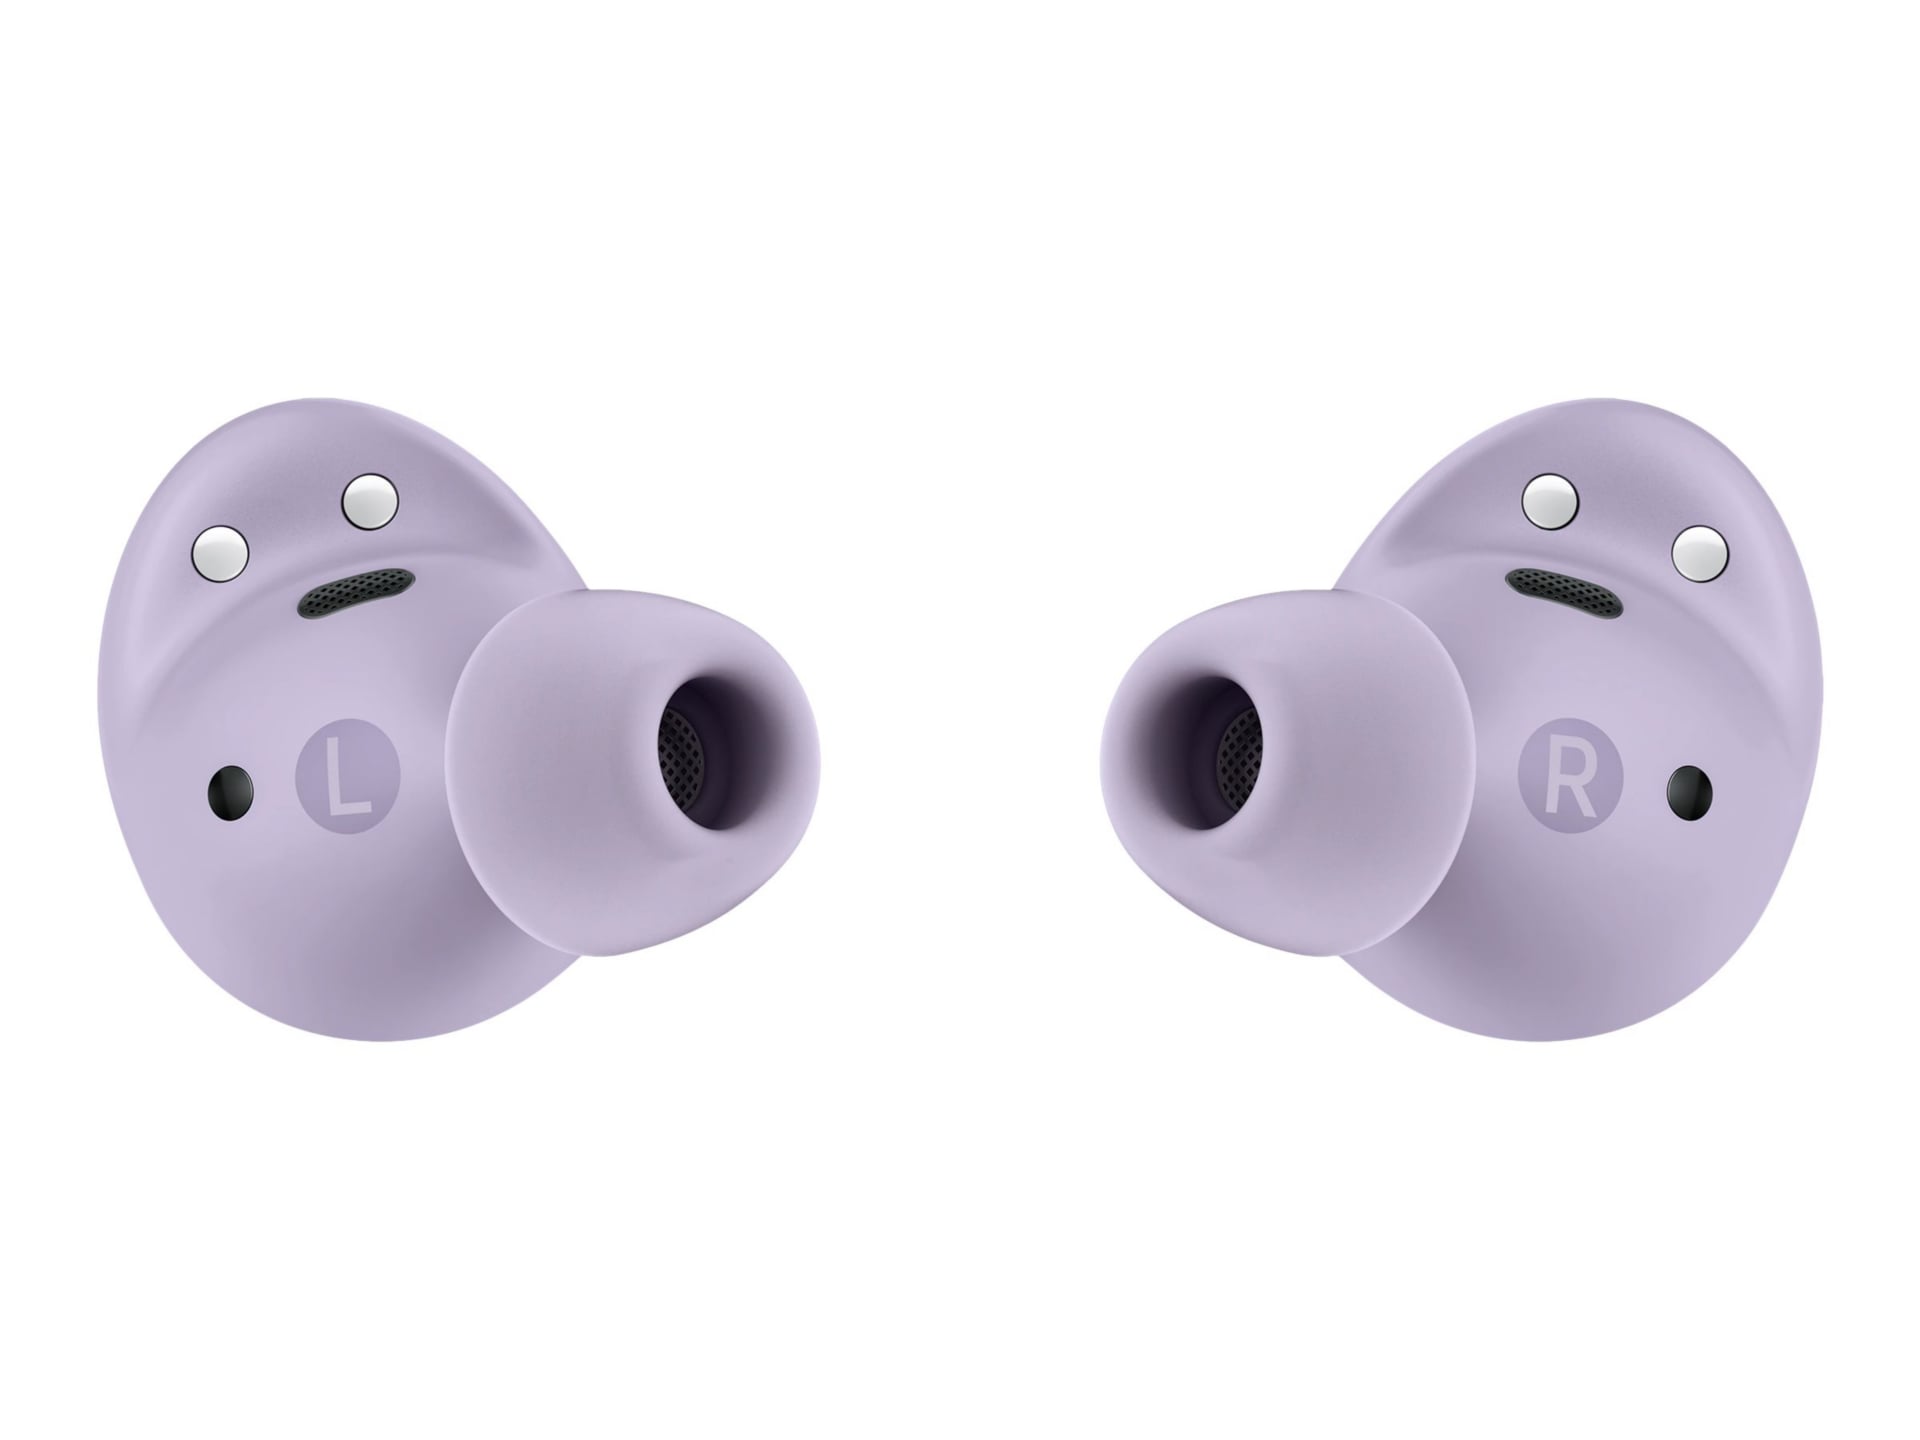 Samsung's Galaxy Buds 2 Pro offer improved audio and ANC for $230